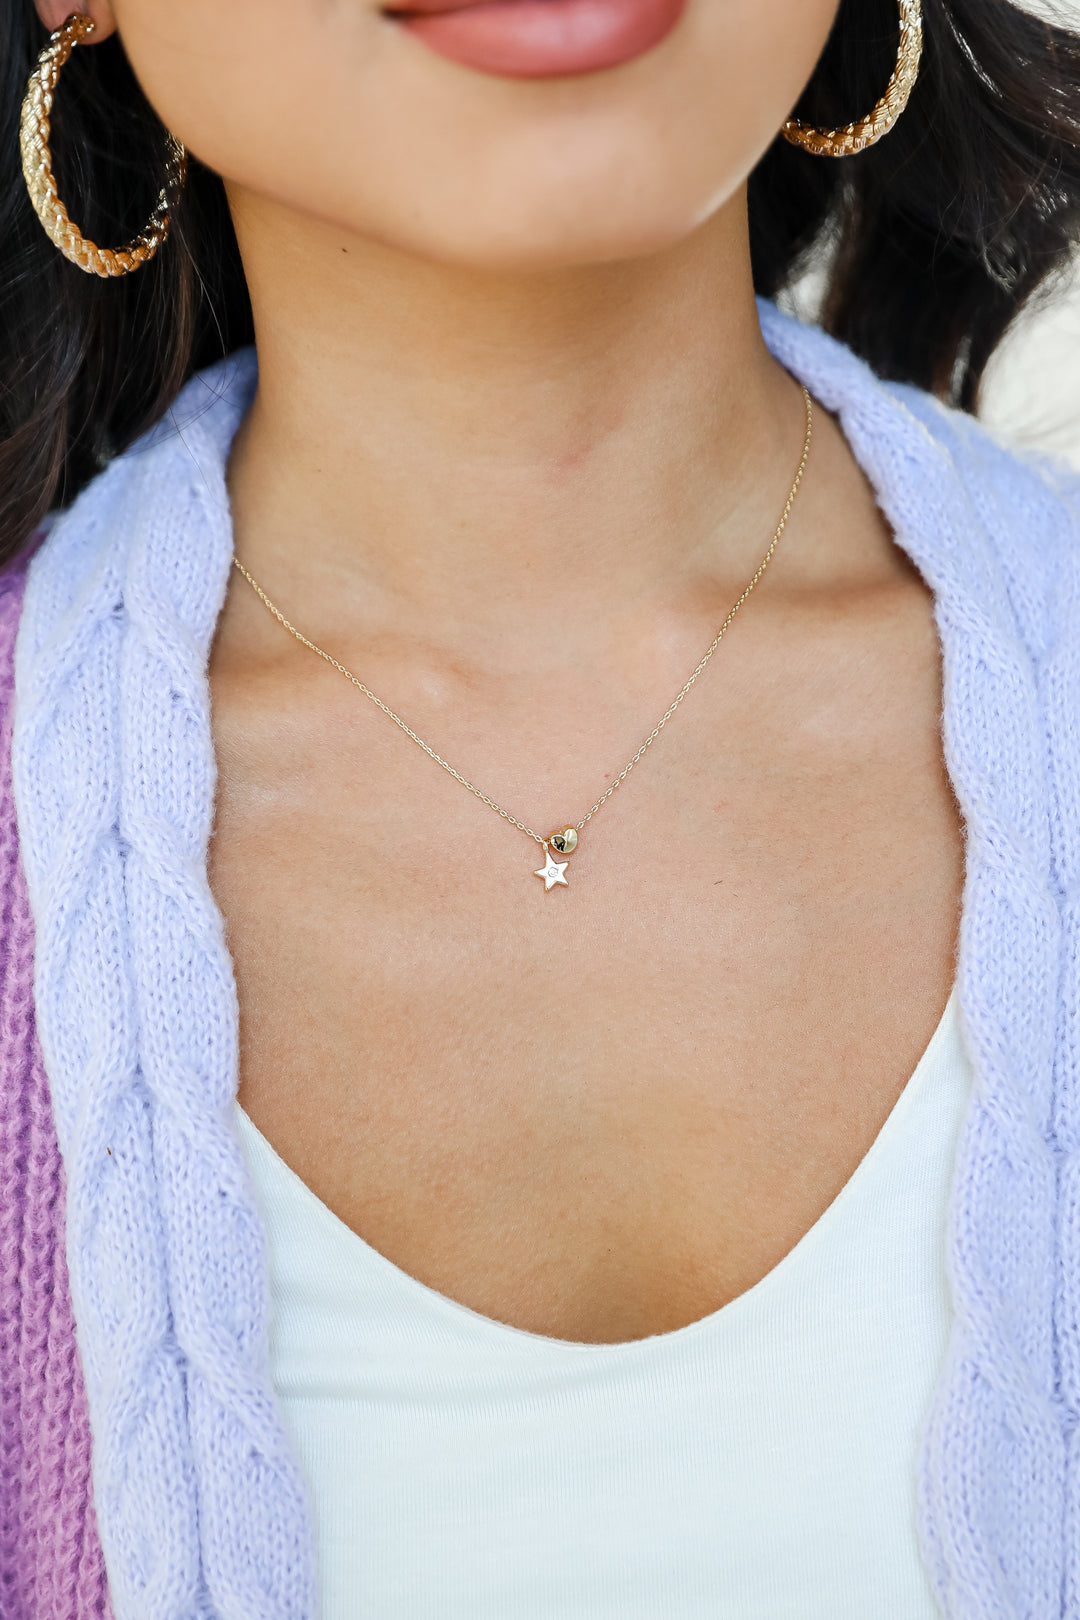 Gold Star + Heart Charm Necklace on model